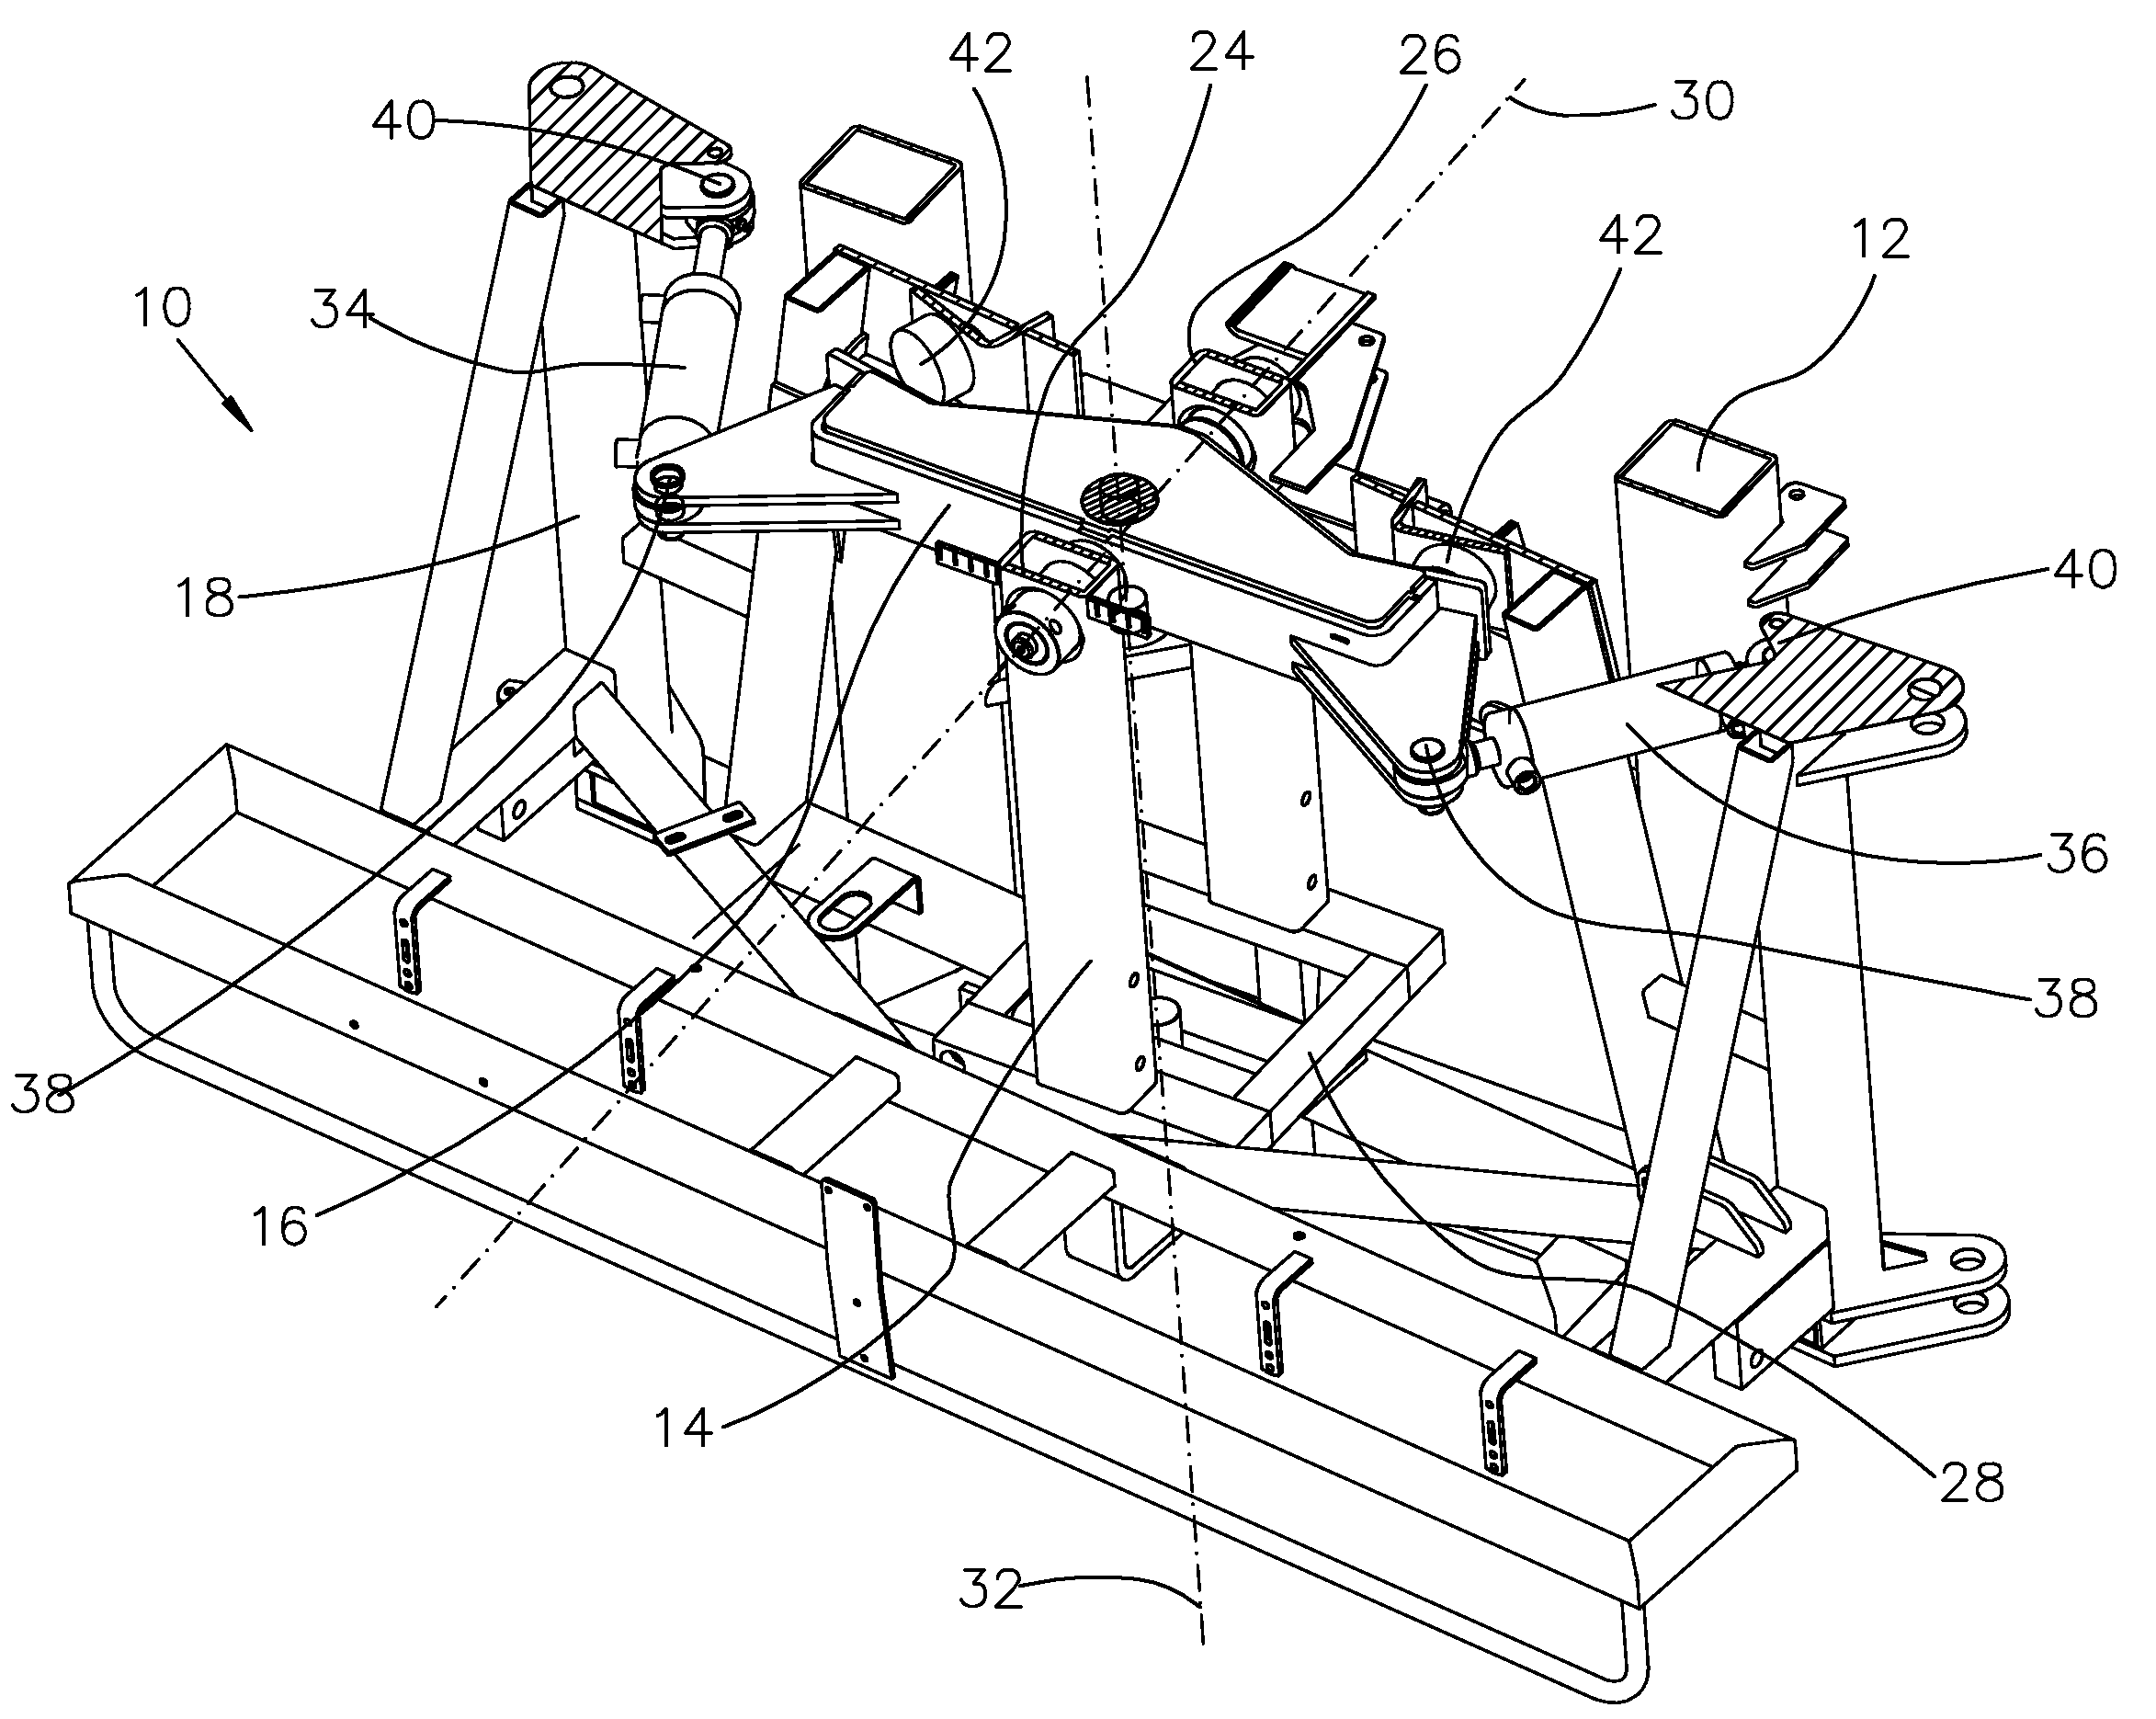 Spray boom with dampening device